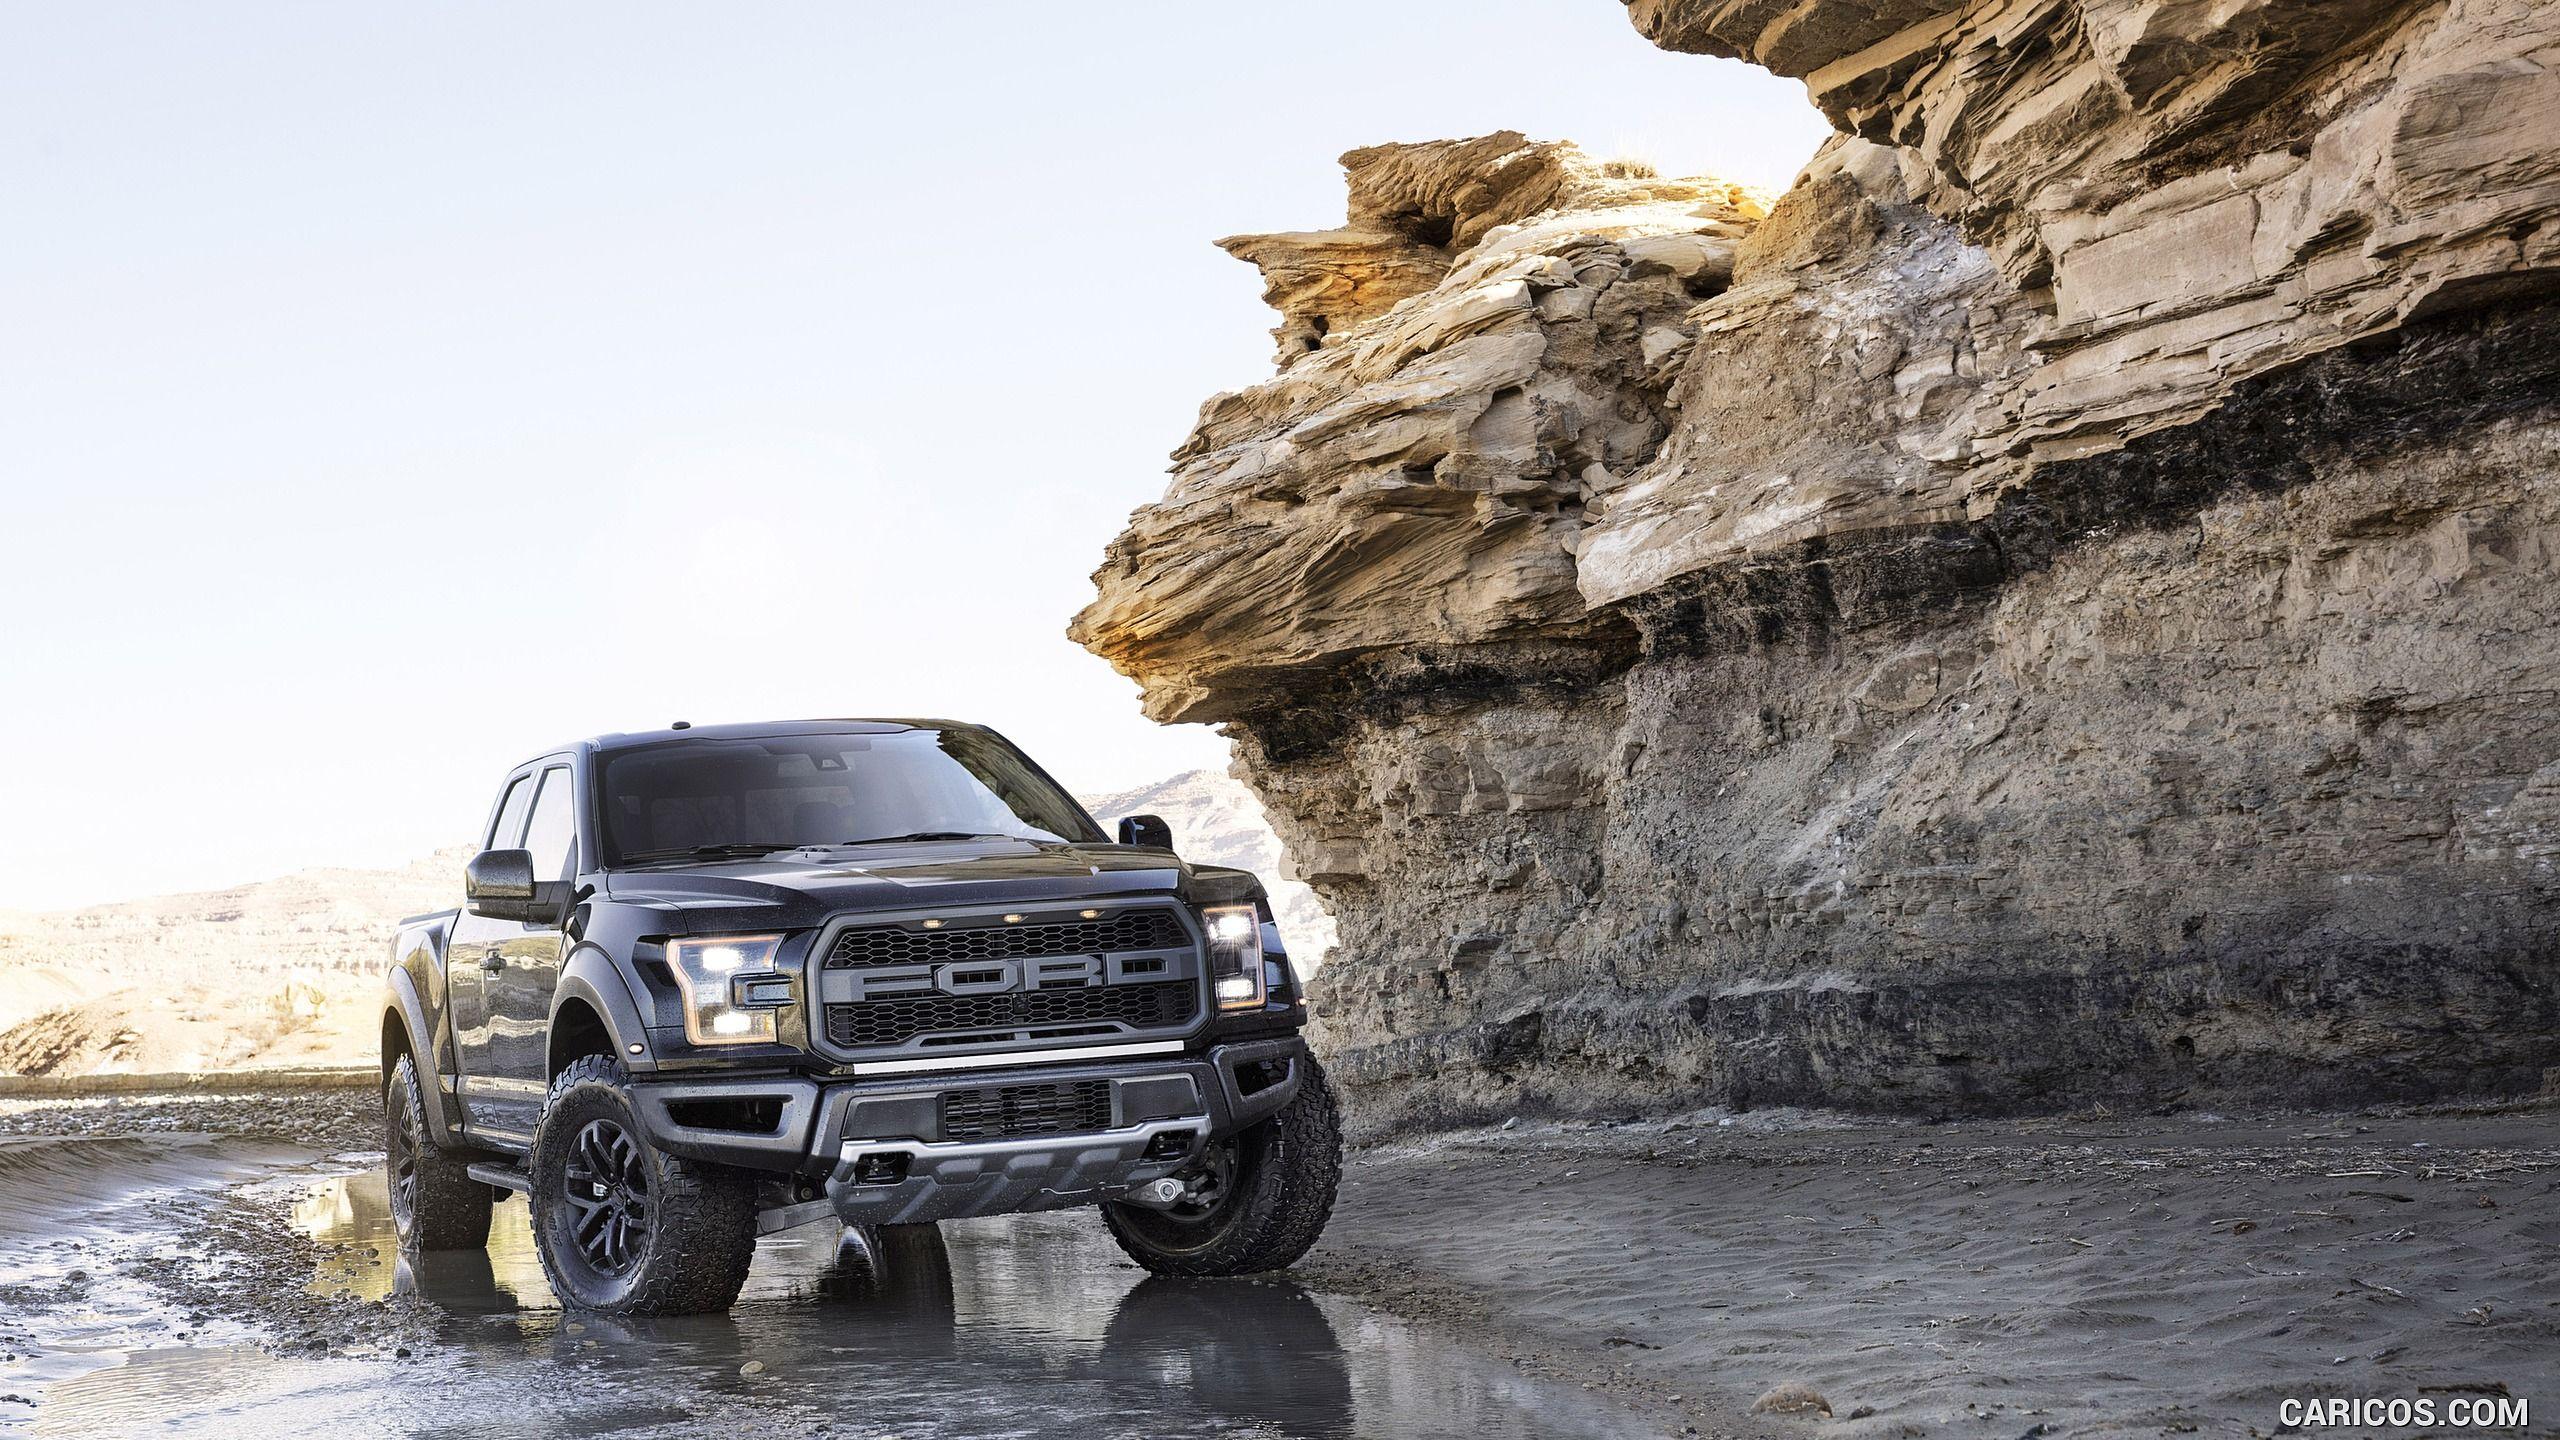 Ford F 150 Raptor Wallpaper. Things To Fill The Garage